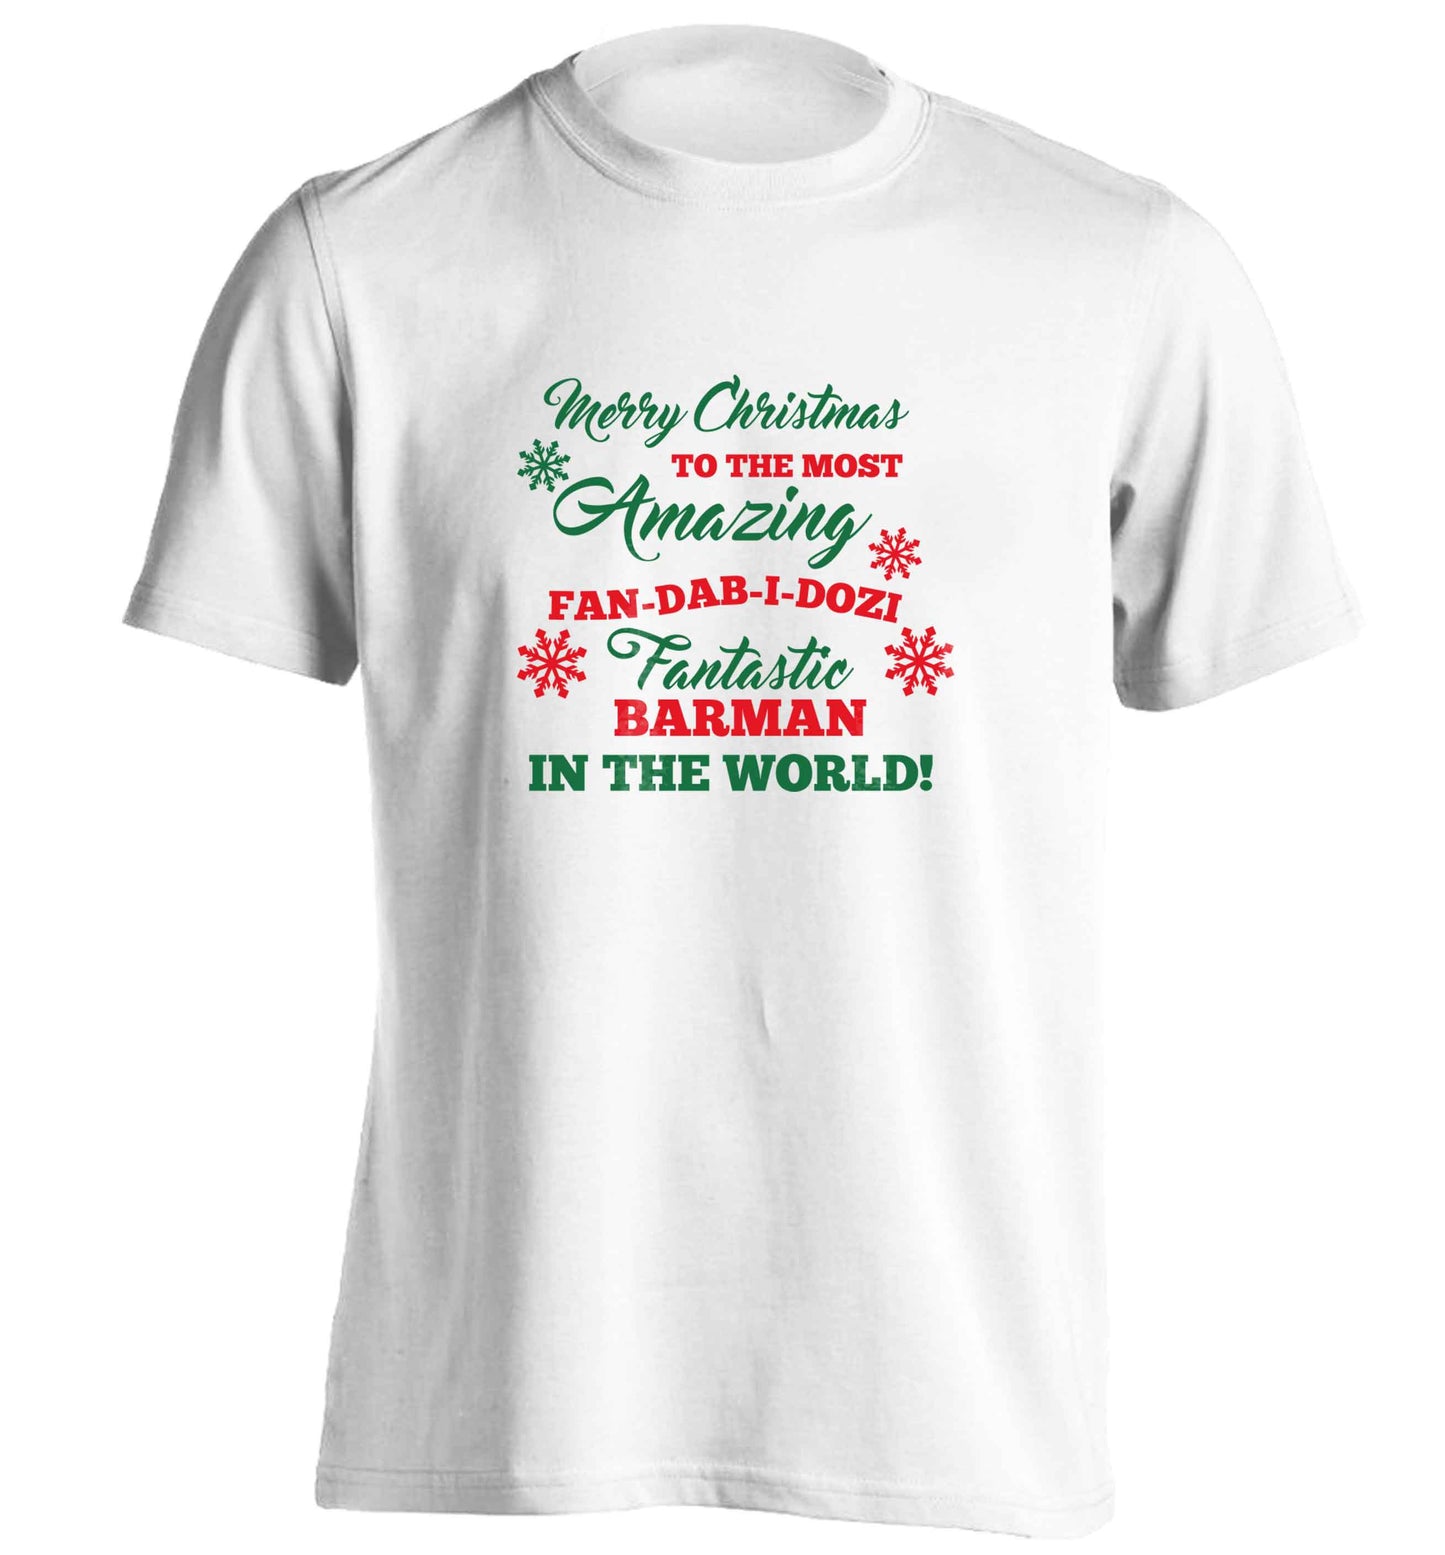 Merry Christmas to the most amazing barman in the world! adults unisex white Tshirt 2XL